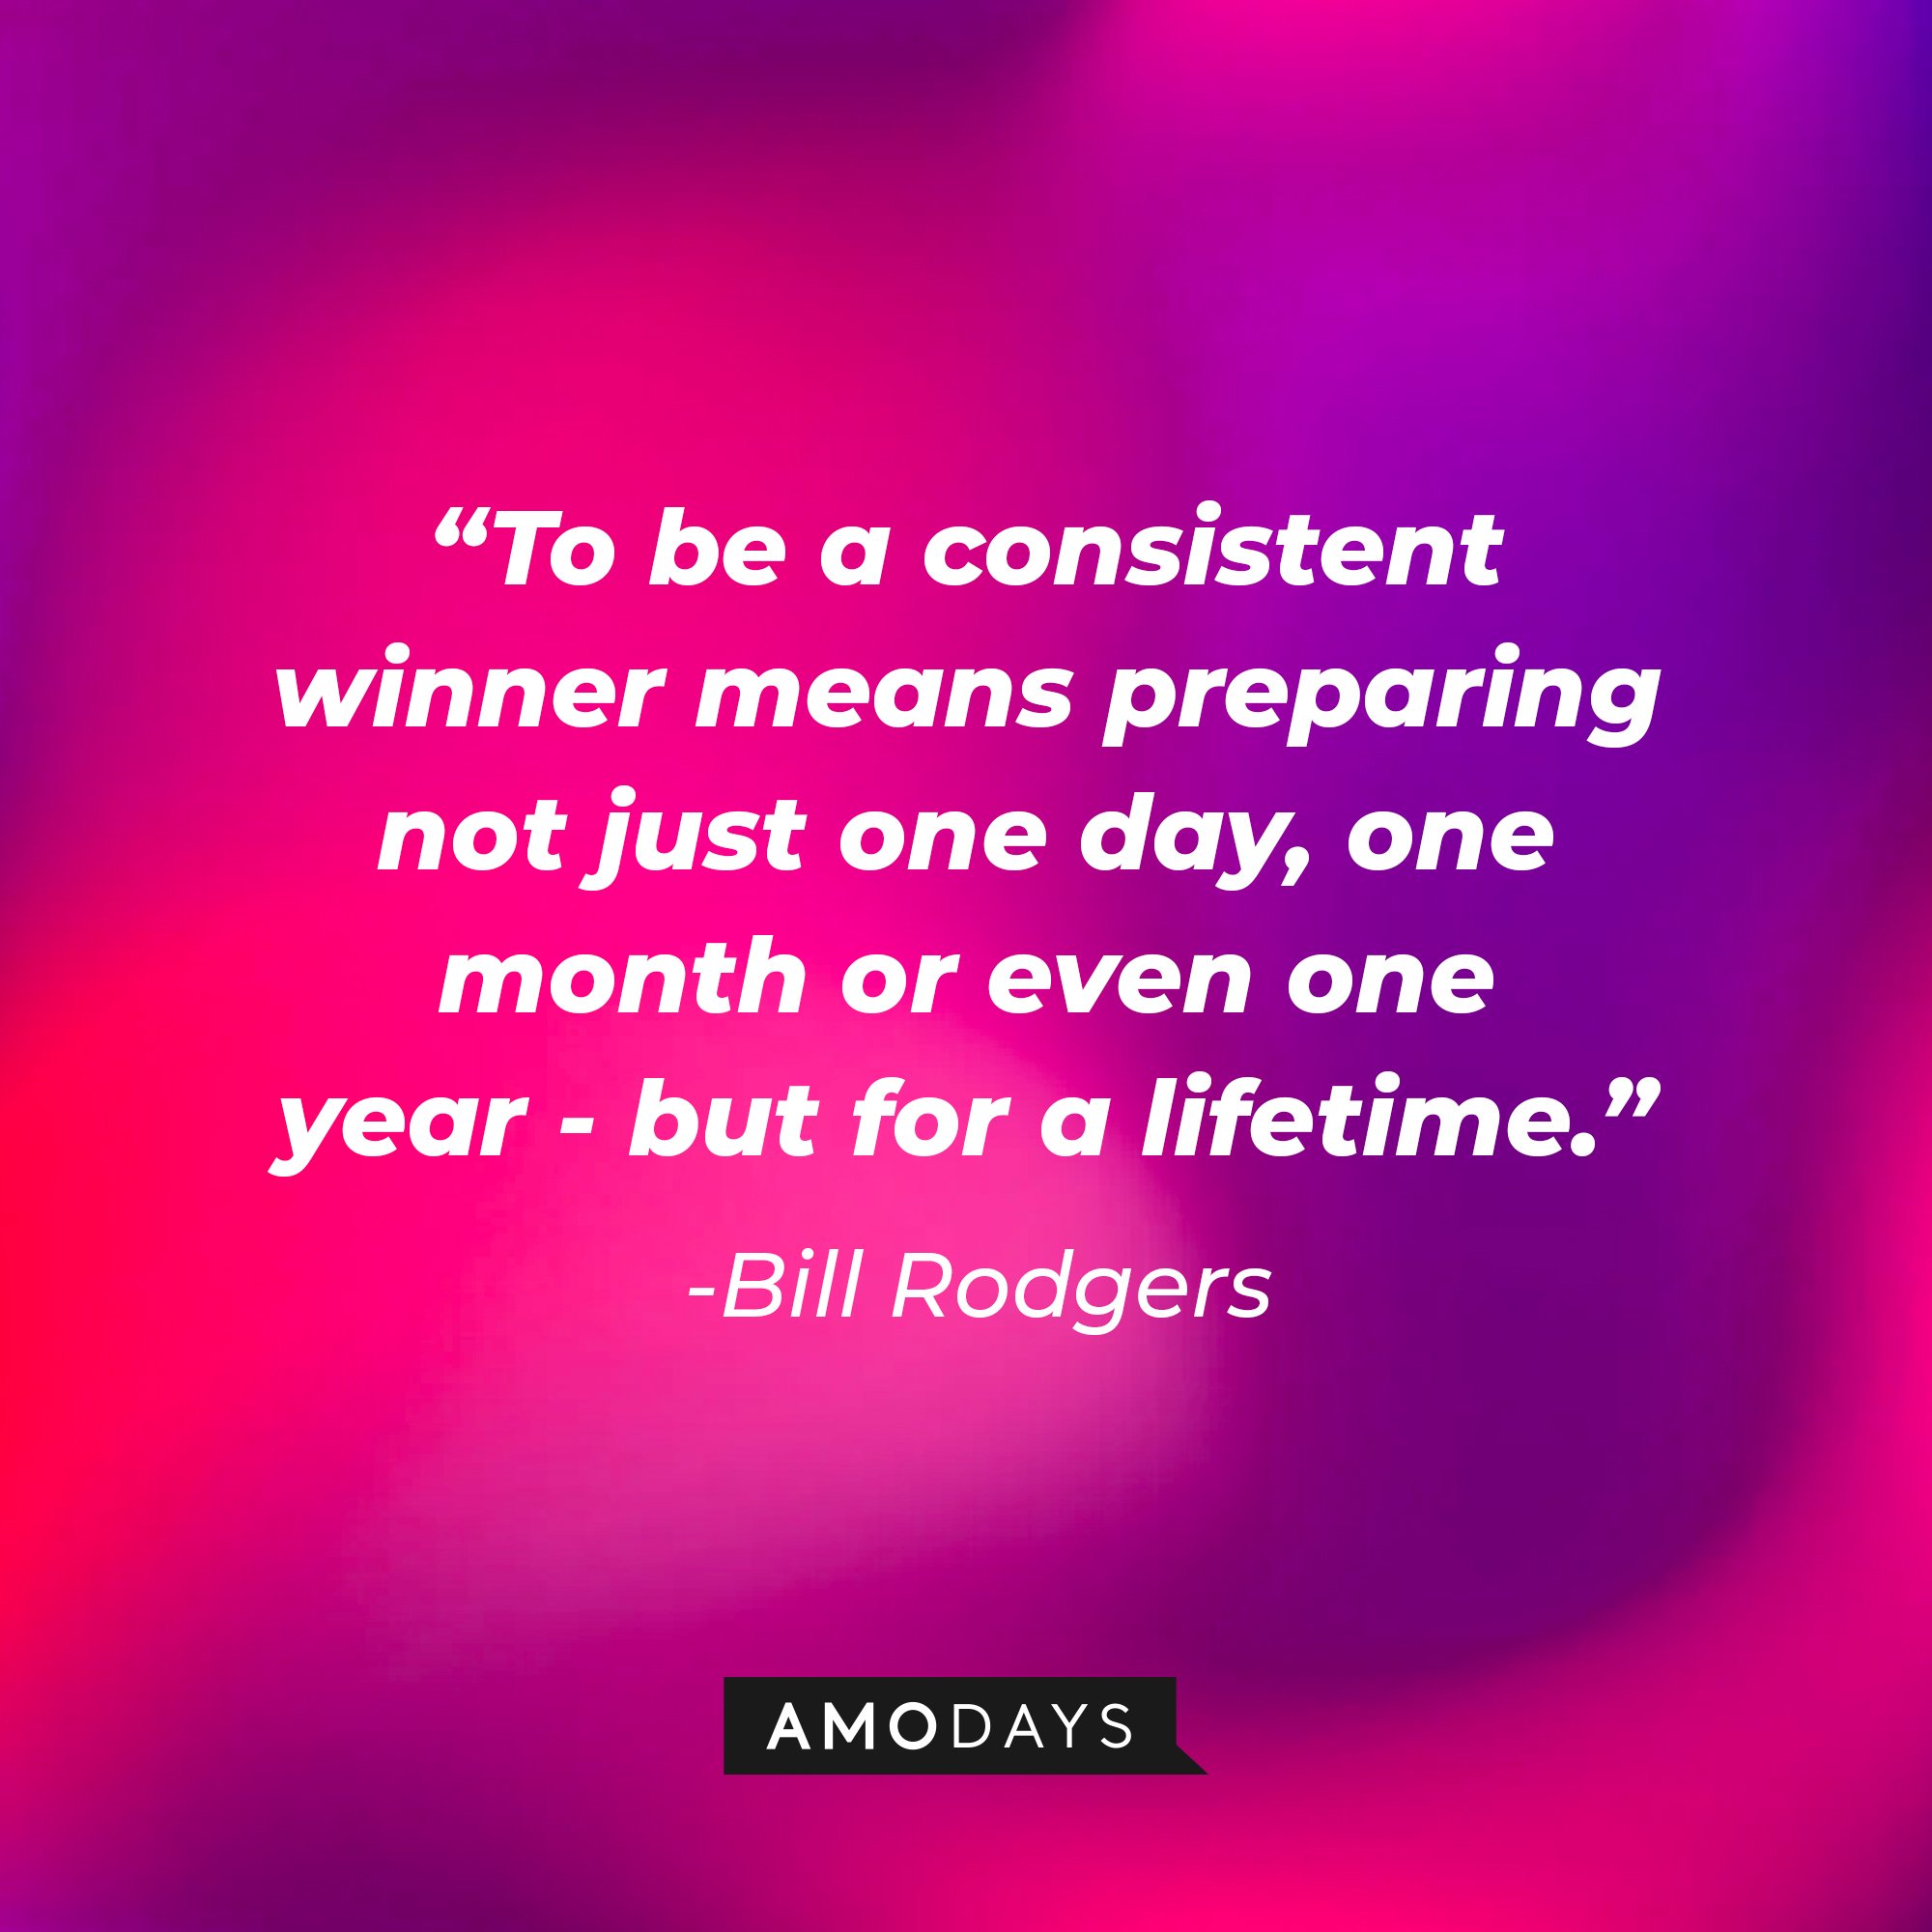 Bill Rodgers' quote: "To be a consistent winner means preparing not just one day, one month or even one year - but for a lifetime." | Image: AmoDays